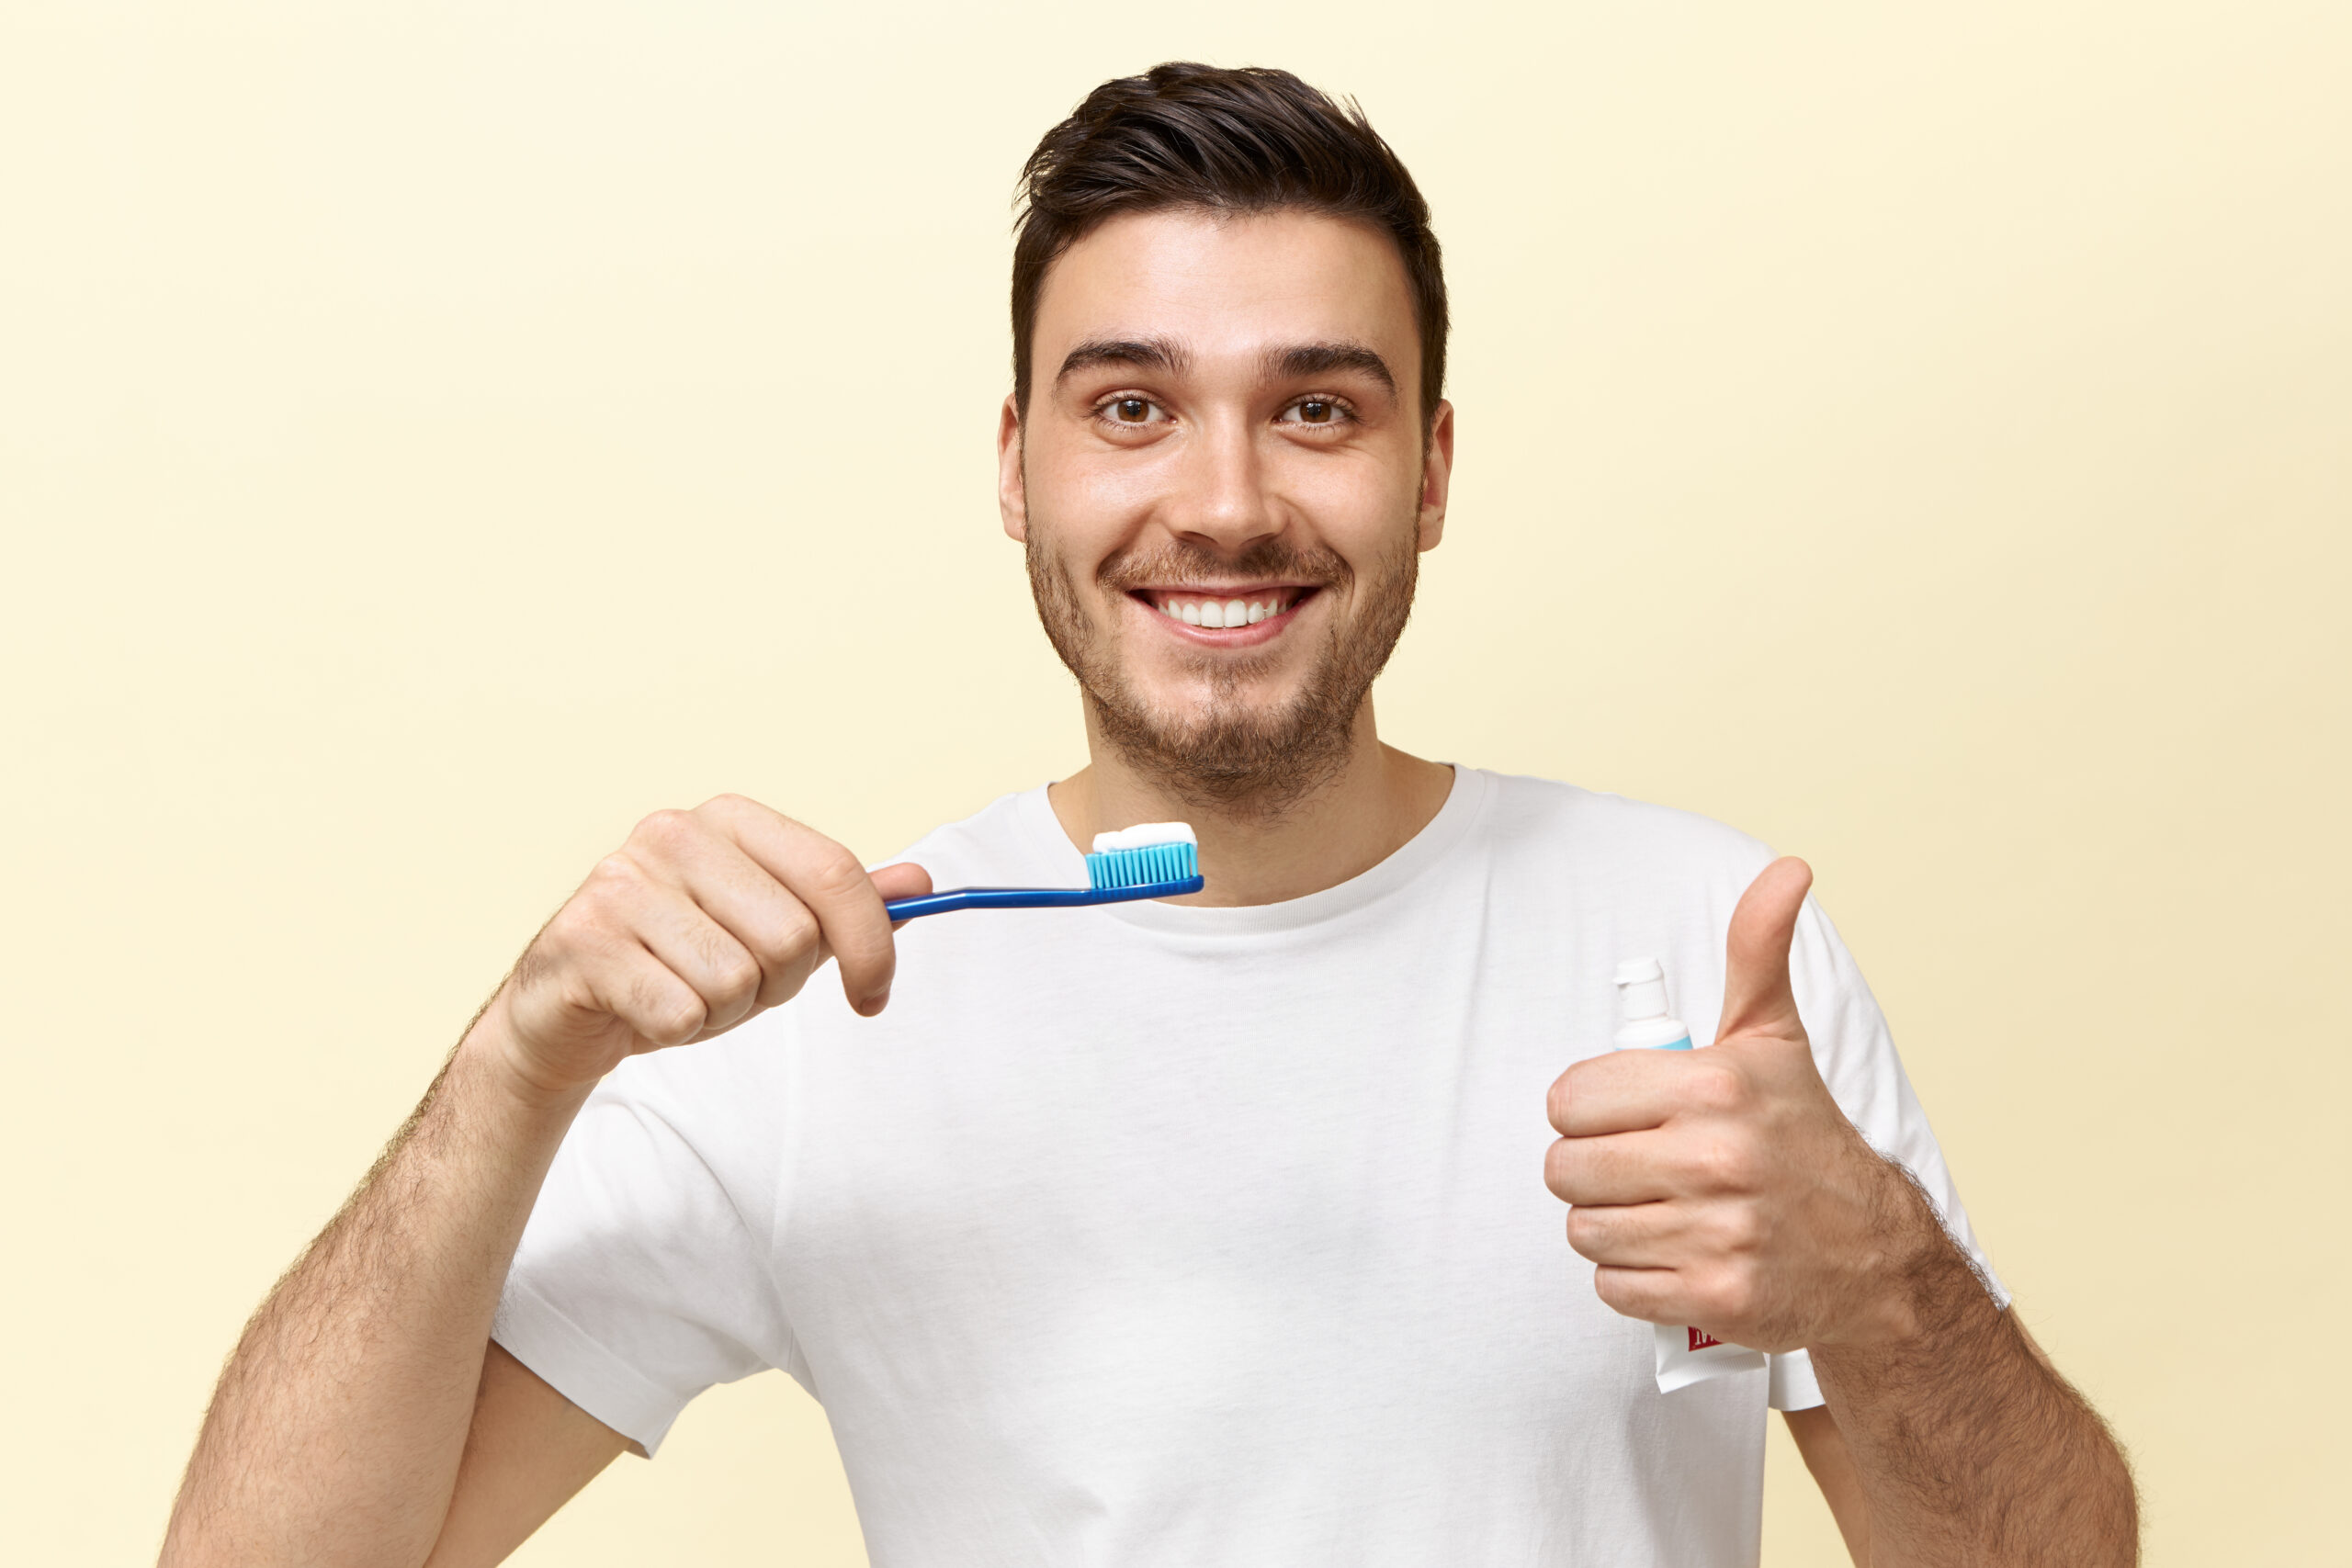 Happy energetic young European guy with stubble holding tooth brush with whitening paste and showing thumbs up gesture being in good mood. Dental care, oral cavity hygiene and healthy teeth concept